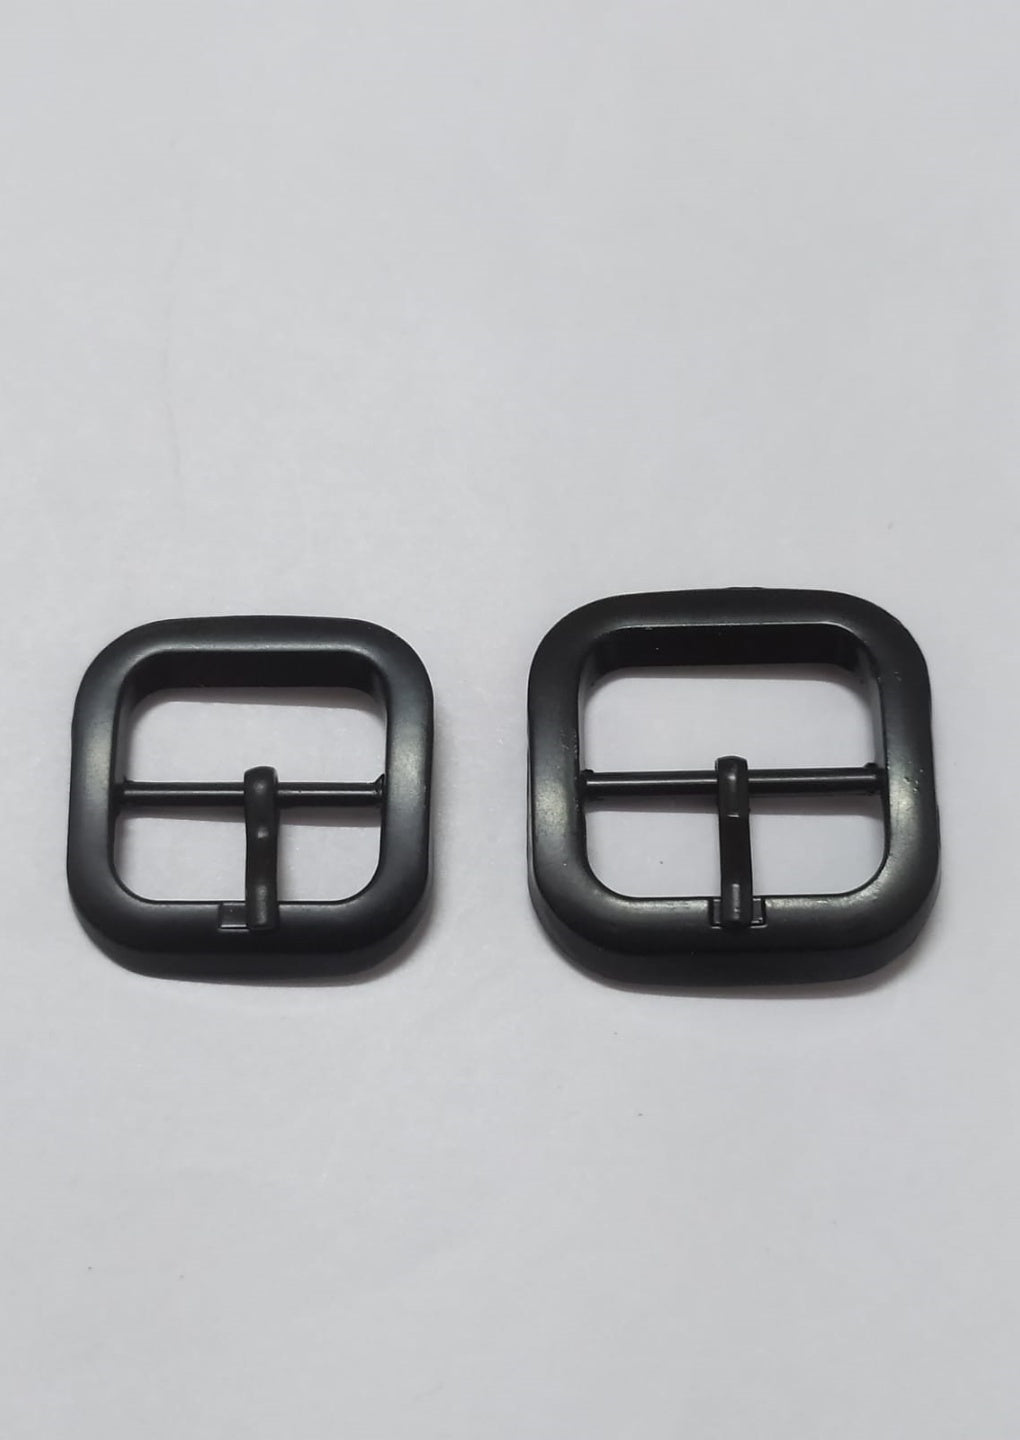 Different shape design in all colors / shoes buckle decorated item buckles /plastic shoe buckle-30